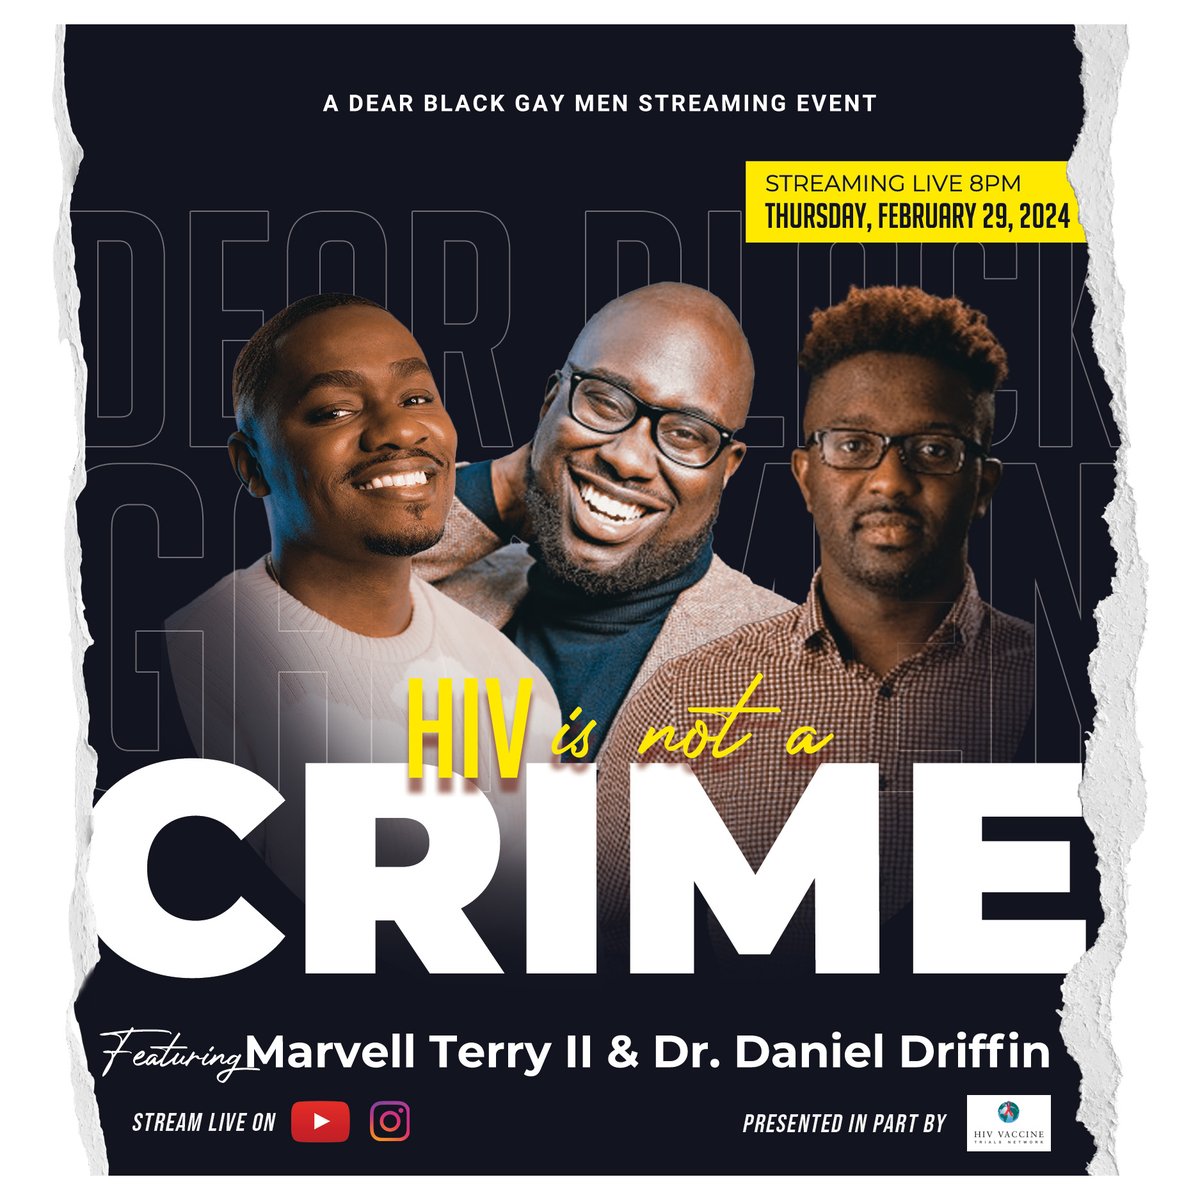 TONIGHT at 8 pm ET! HIV is not a crime. What does this mean for everyday people attempting to thrive with HIV? @dearblackgaymen will talk with Dr. Daniel Driffin, External Relations, Project Manager at The HIV Vaccine Trials and author Marvell Terry II. youtube.com/watch?v=-fTCao…